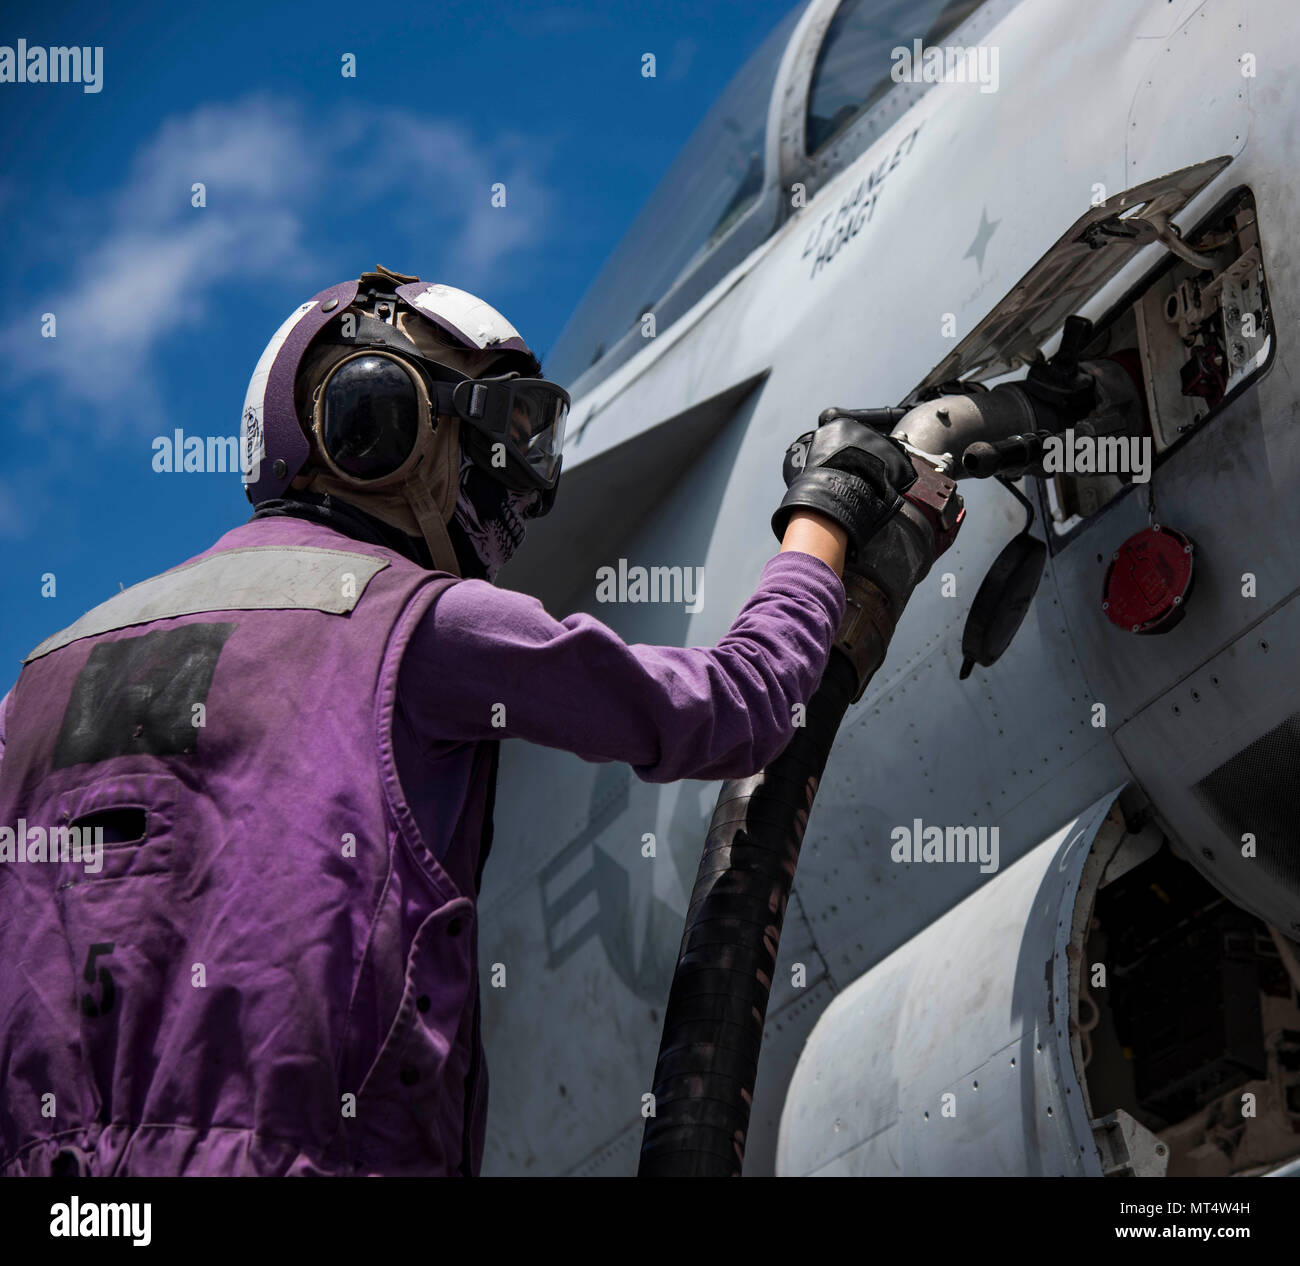 170726-N-QI061-190   ATLANTIC OCEAN (July 26, 2017) Airman Kenric Ong, from Moreno Valley, Calif., fuels an F/A-18E Super Hornet assigned to the Gladiators of Strike Fighter Squadron (VFA) 106 on the fight deck aboard the aircraft carrier USS Dwight D. Eisenhower (CVN 69)(Ike). Ike is currently conducting carrier qualifications during the maintenance phase of the Optimized Fleet Response Plan (OFRP). (U.S. Navy photo by Mass Communication Specialist 3rd Class Nathan T. Beard) Stock Photo